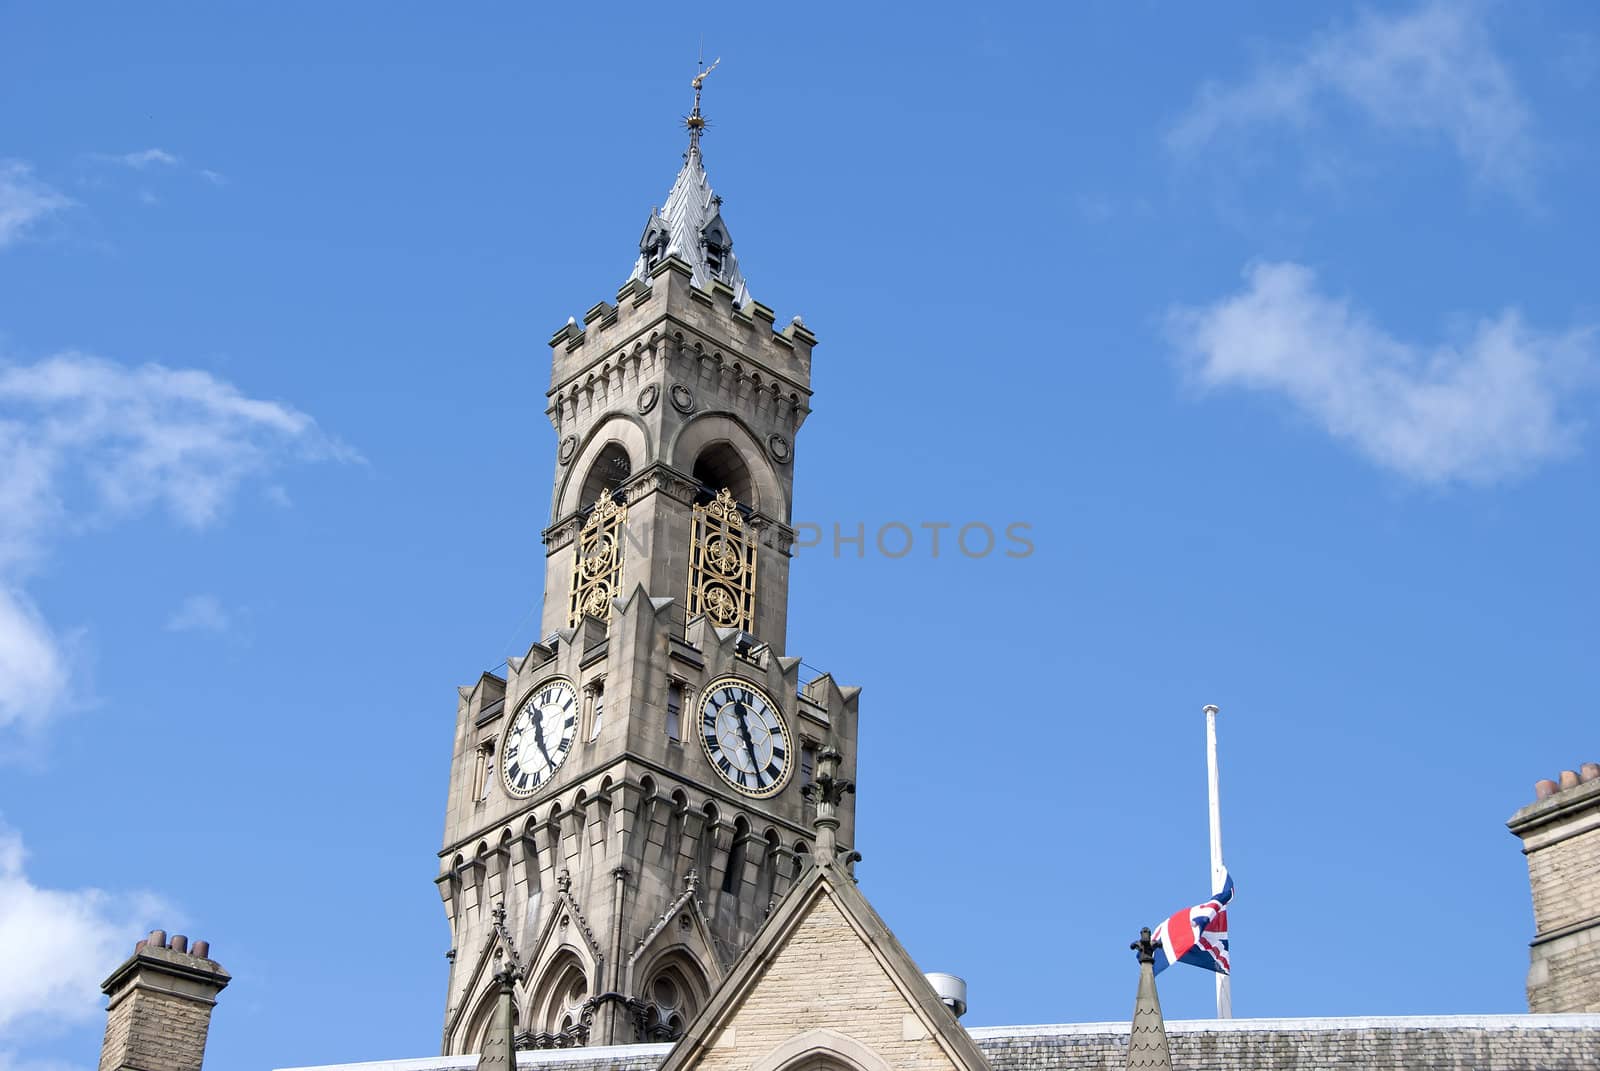 The Town Hall and Belltower of an English City